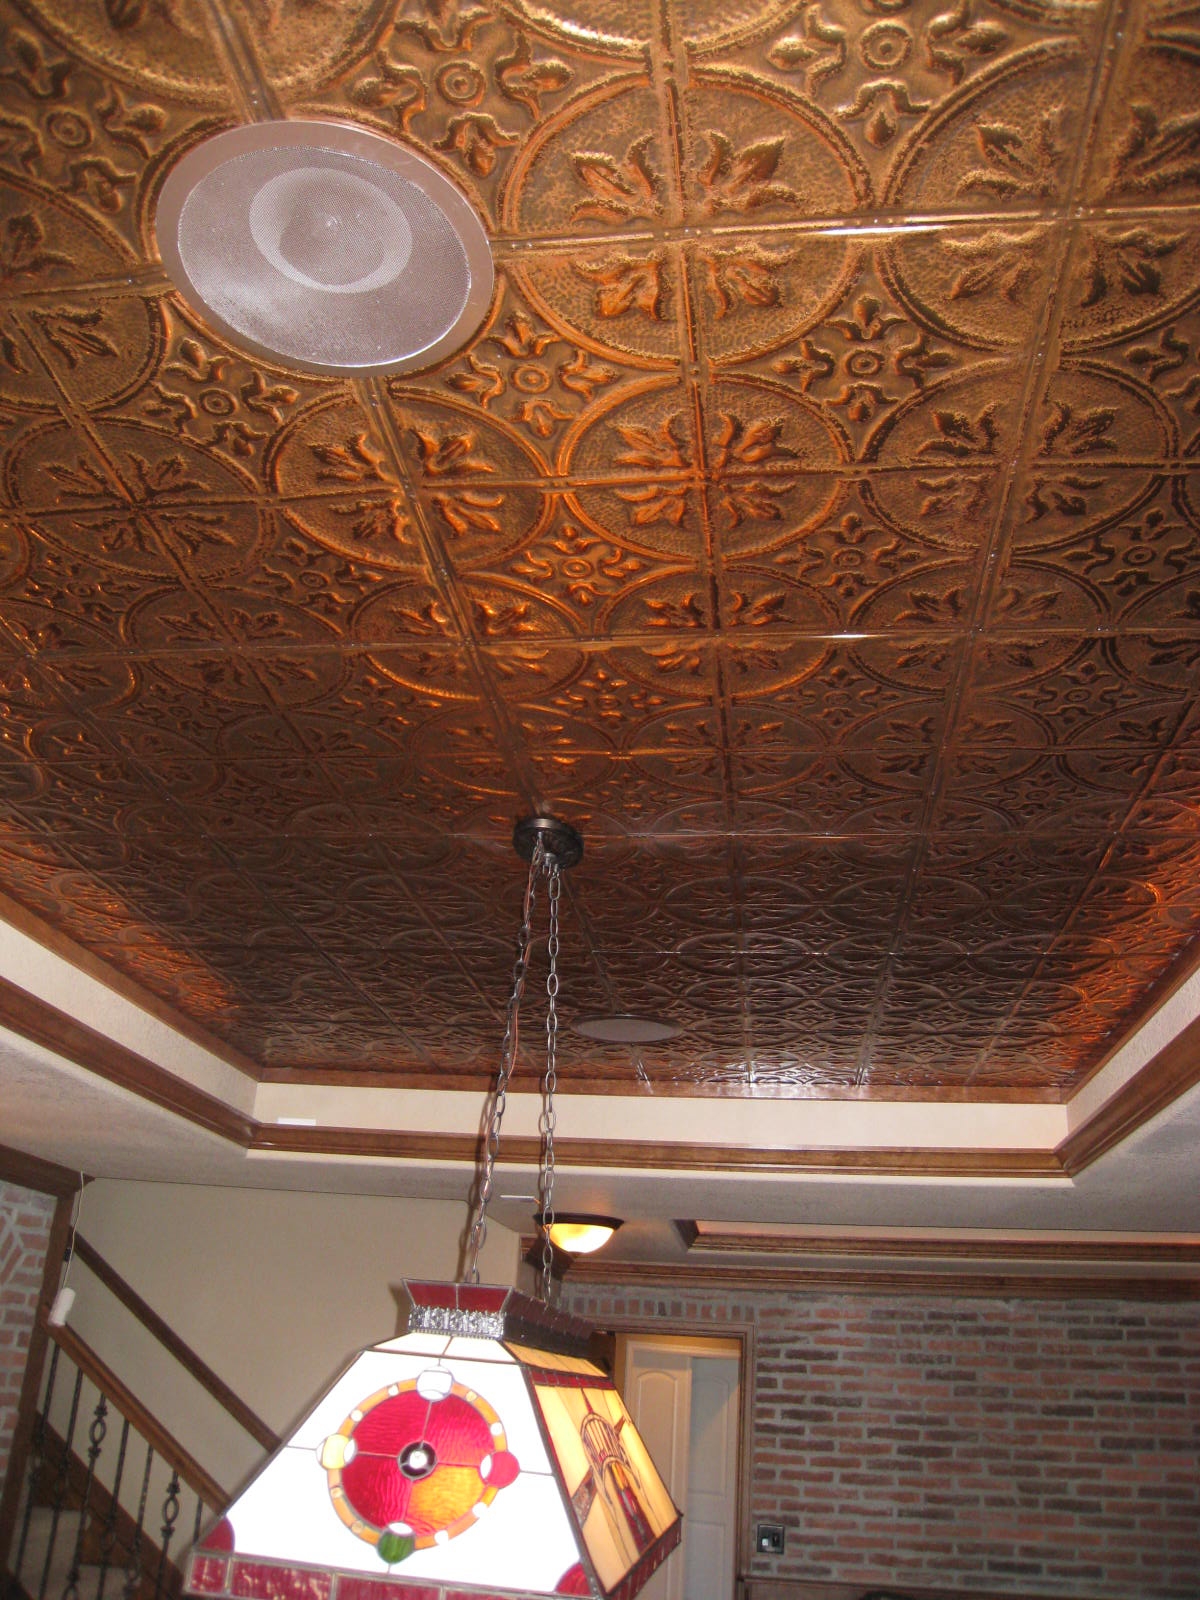 Stamped Copper Ceiling Tiles Stamped Copper Ceiling Tiles stamped ceiling tiles choice image tile flooring design ideas 1200 X 1600